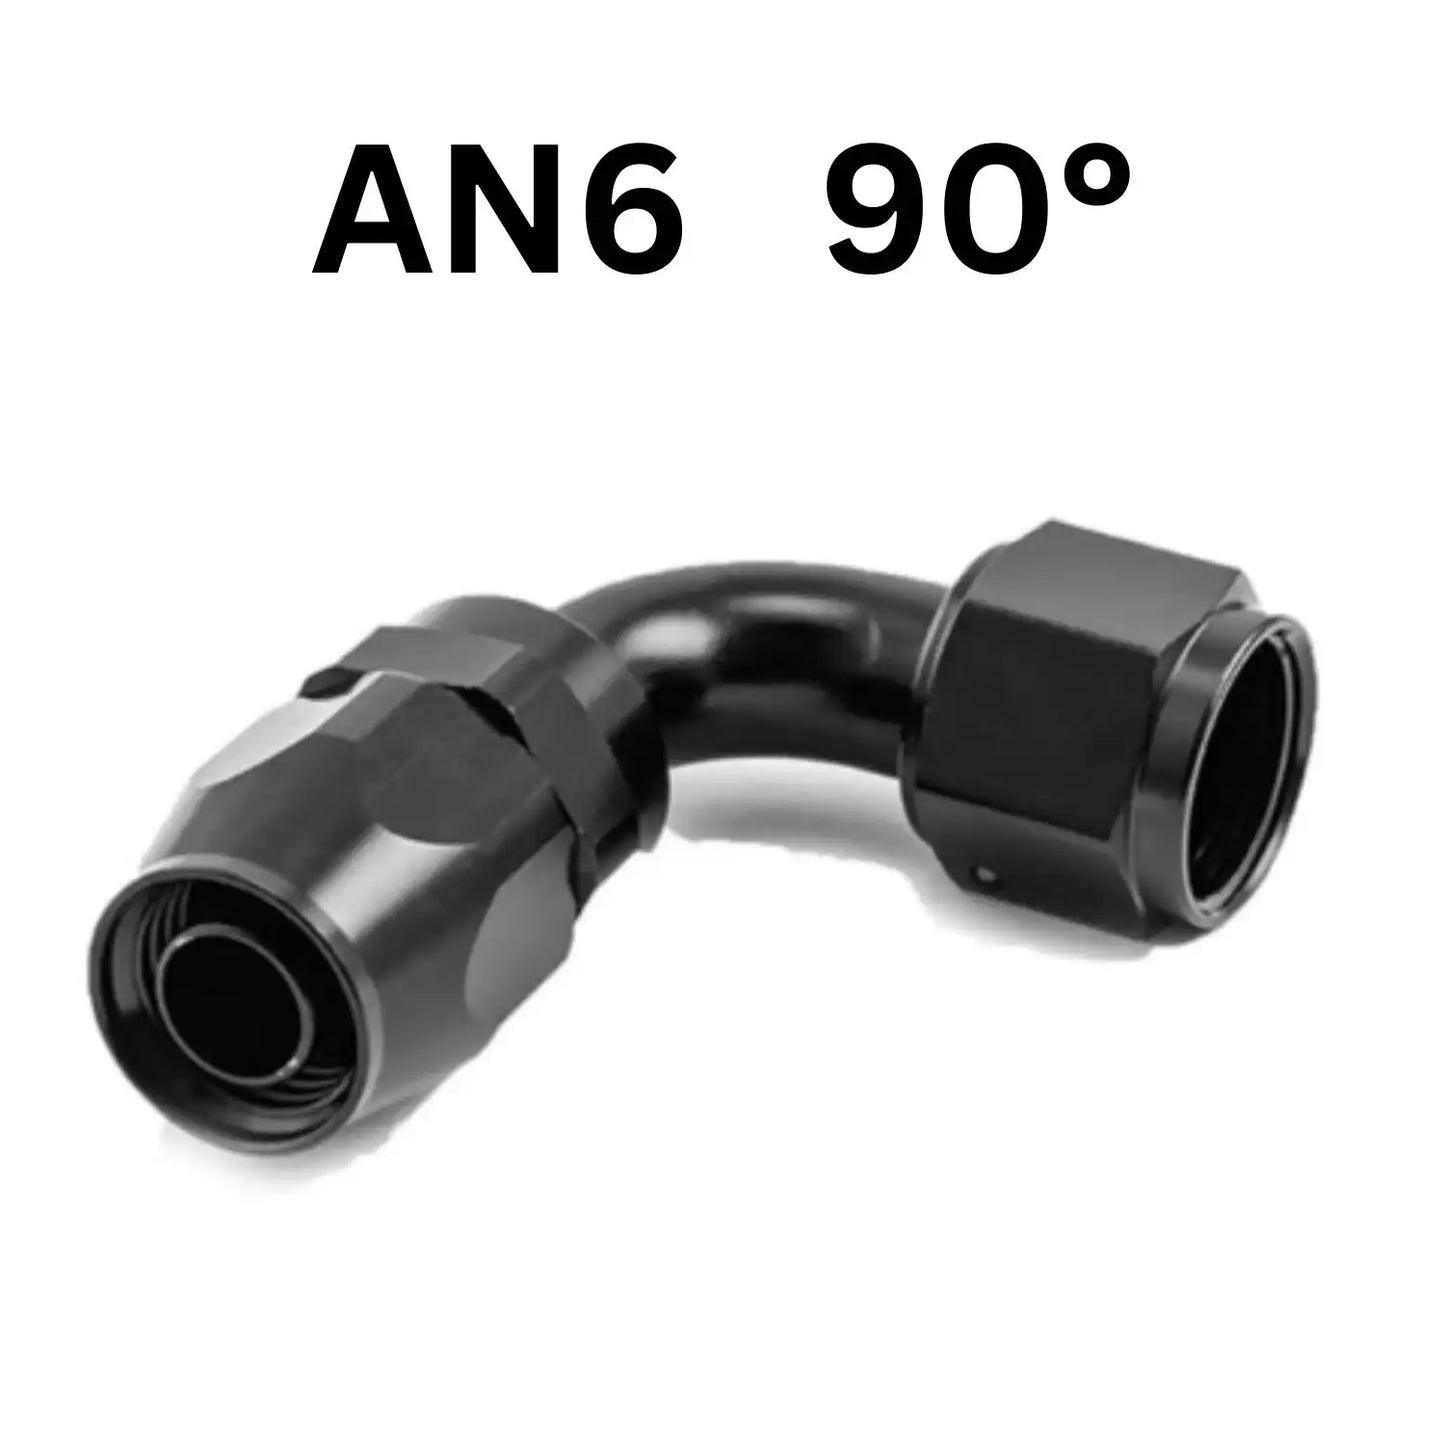 AN6 90° Degree Black Hose Fitting Adapter